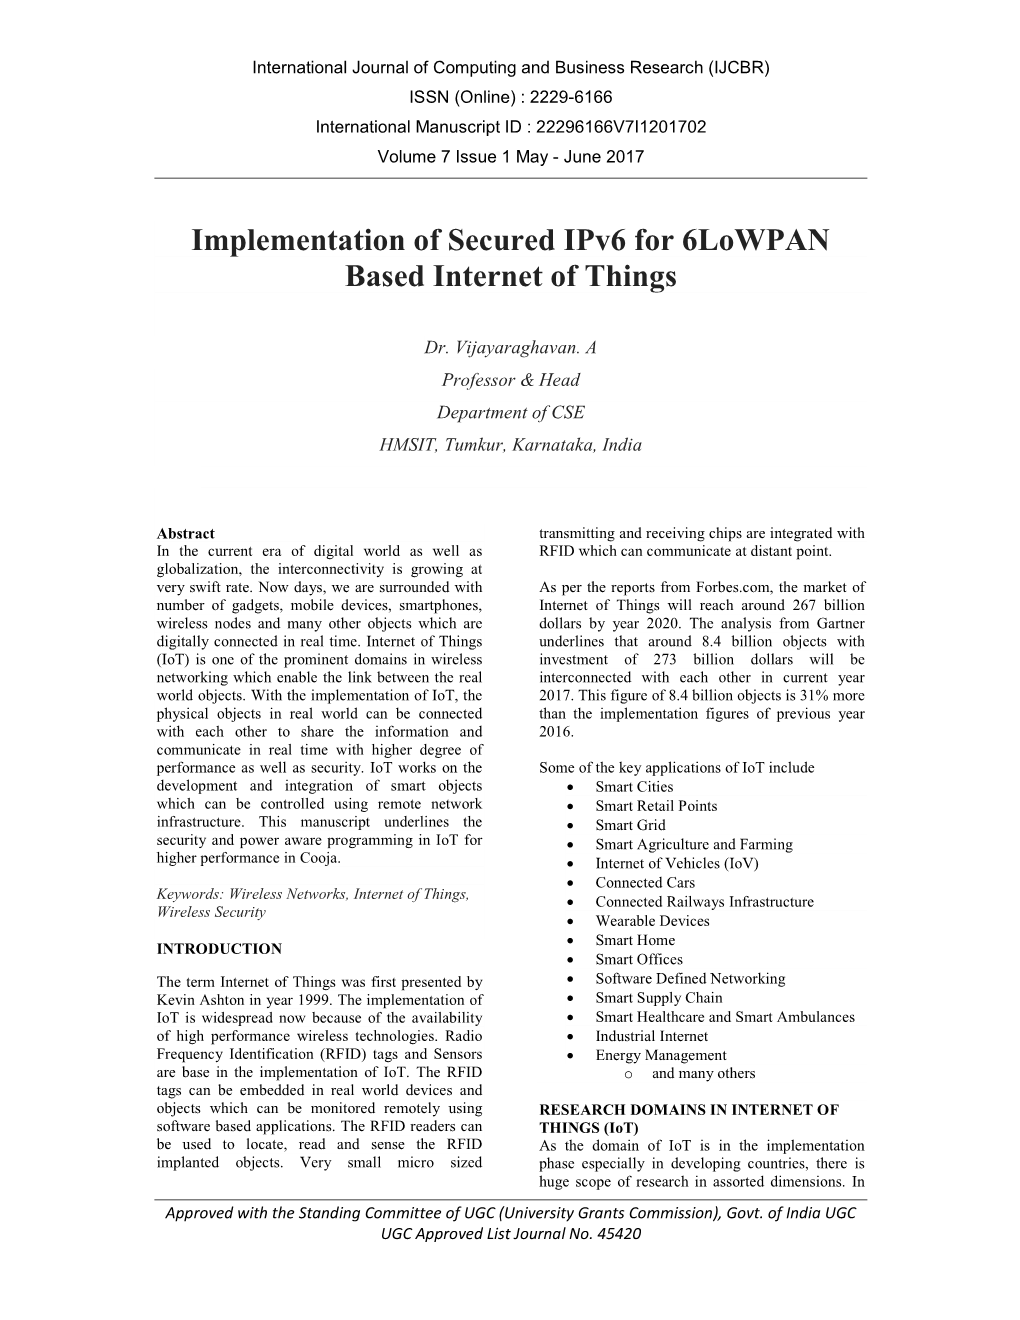 Implementation of Secured Ipv6 for 6Lowpan Based Internet of Things